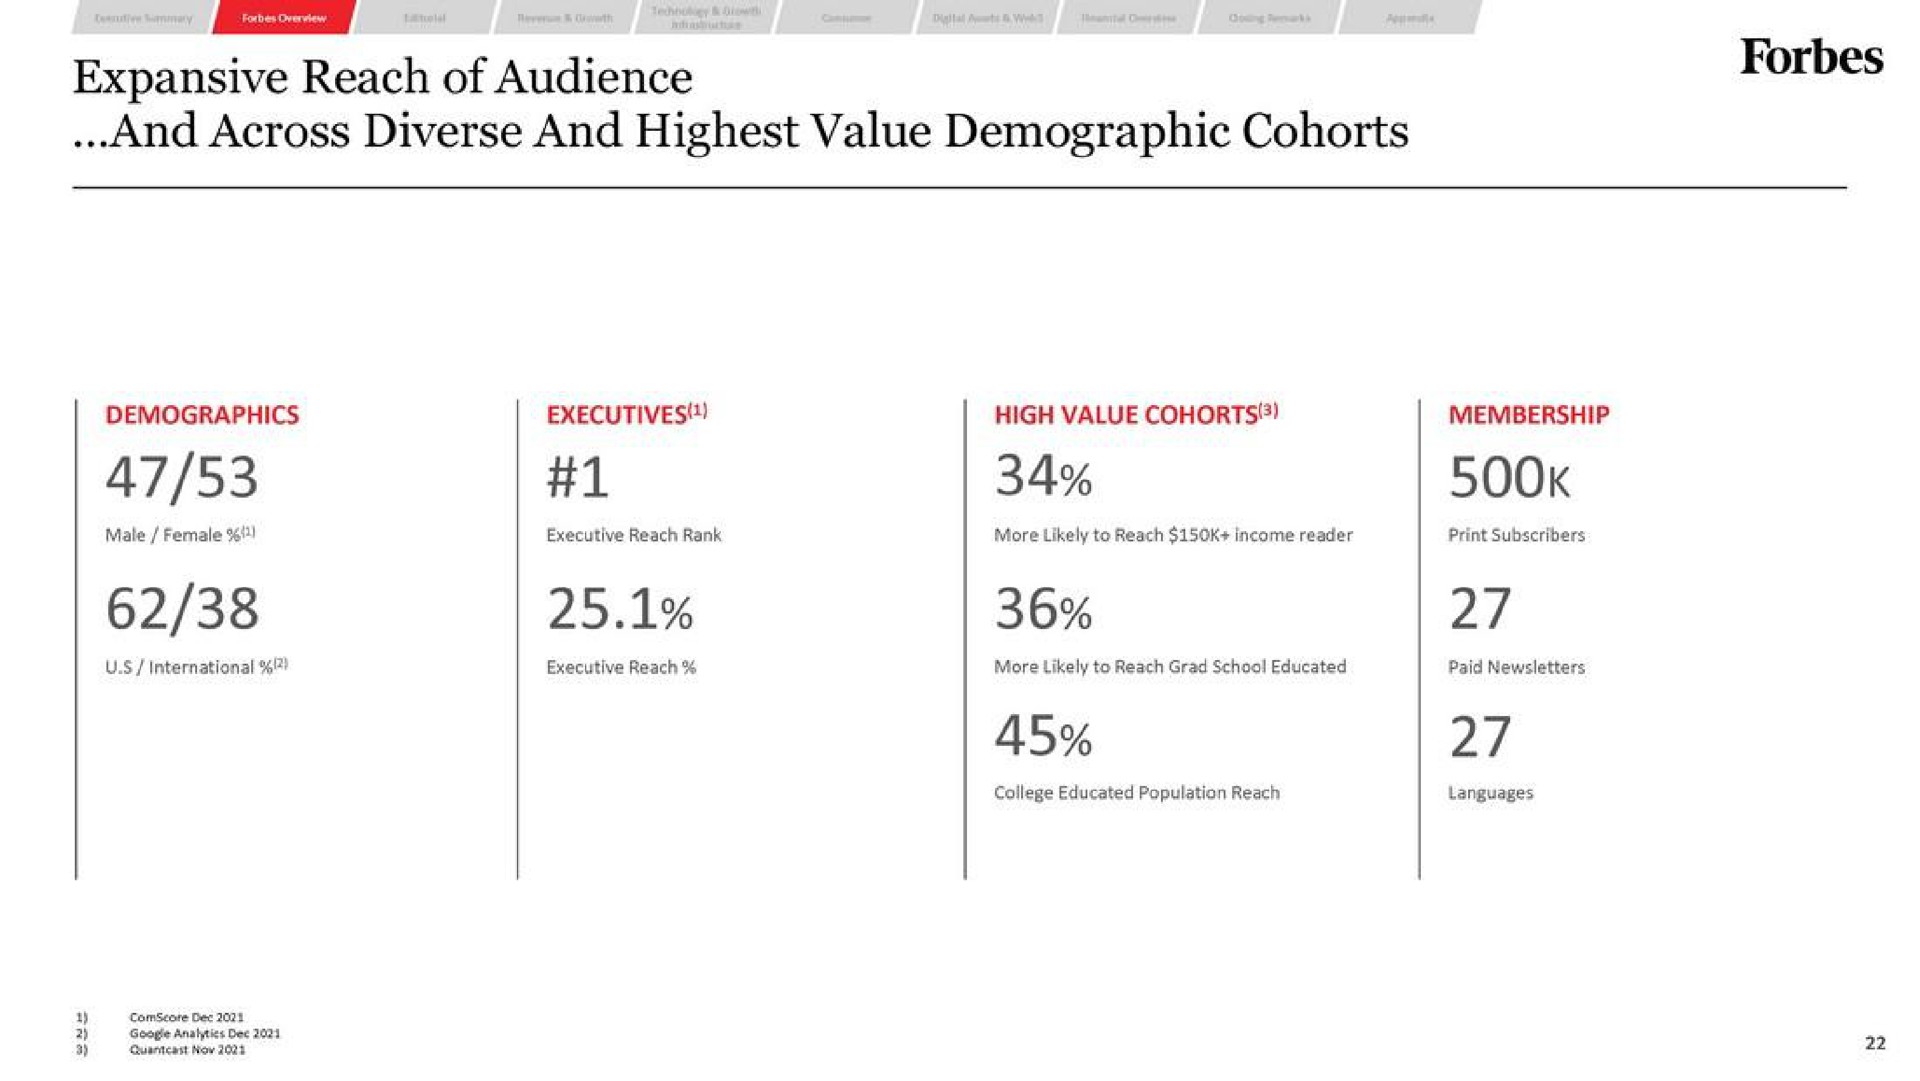 and across diverse and highest value demographic cohorts of audience | Forbes